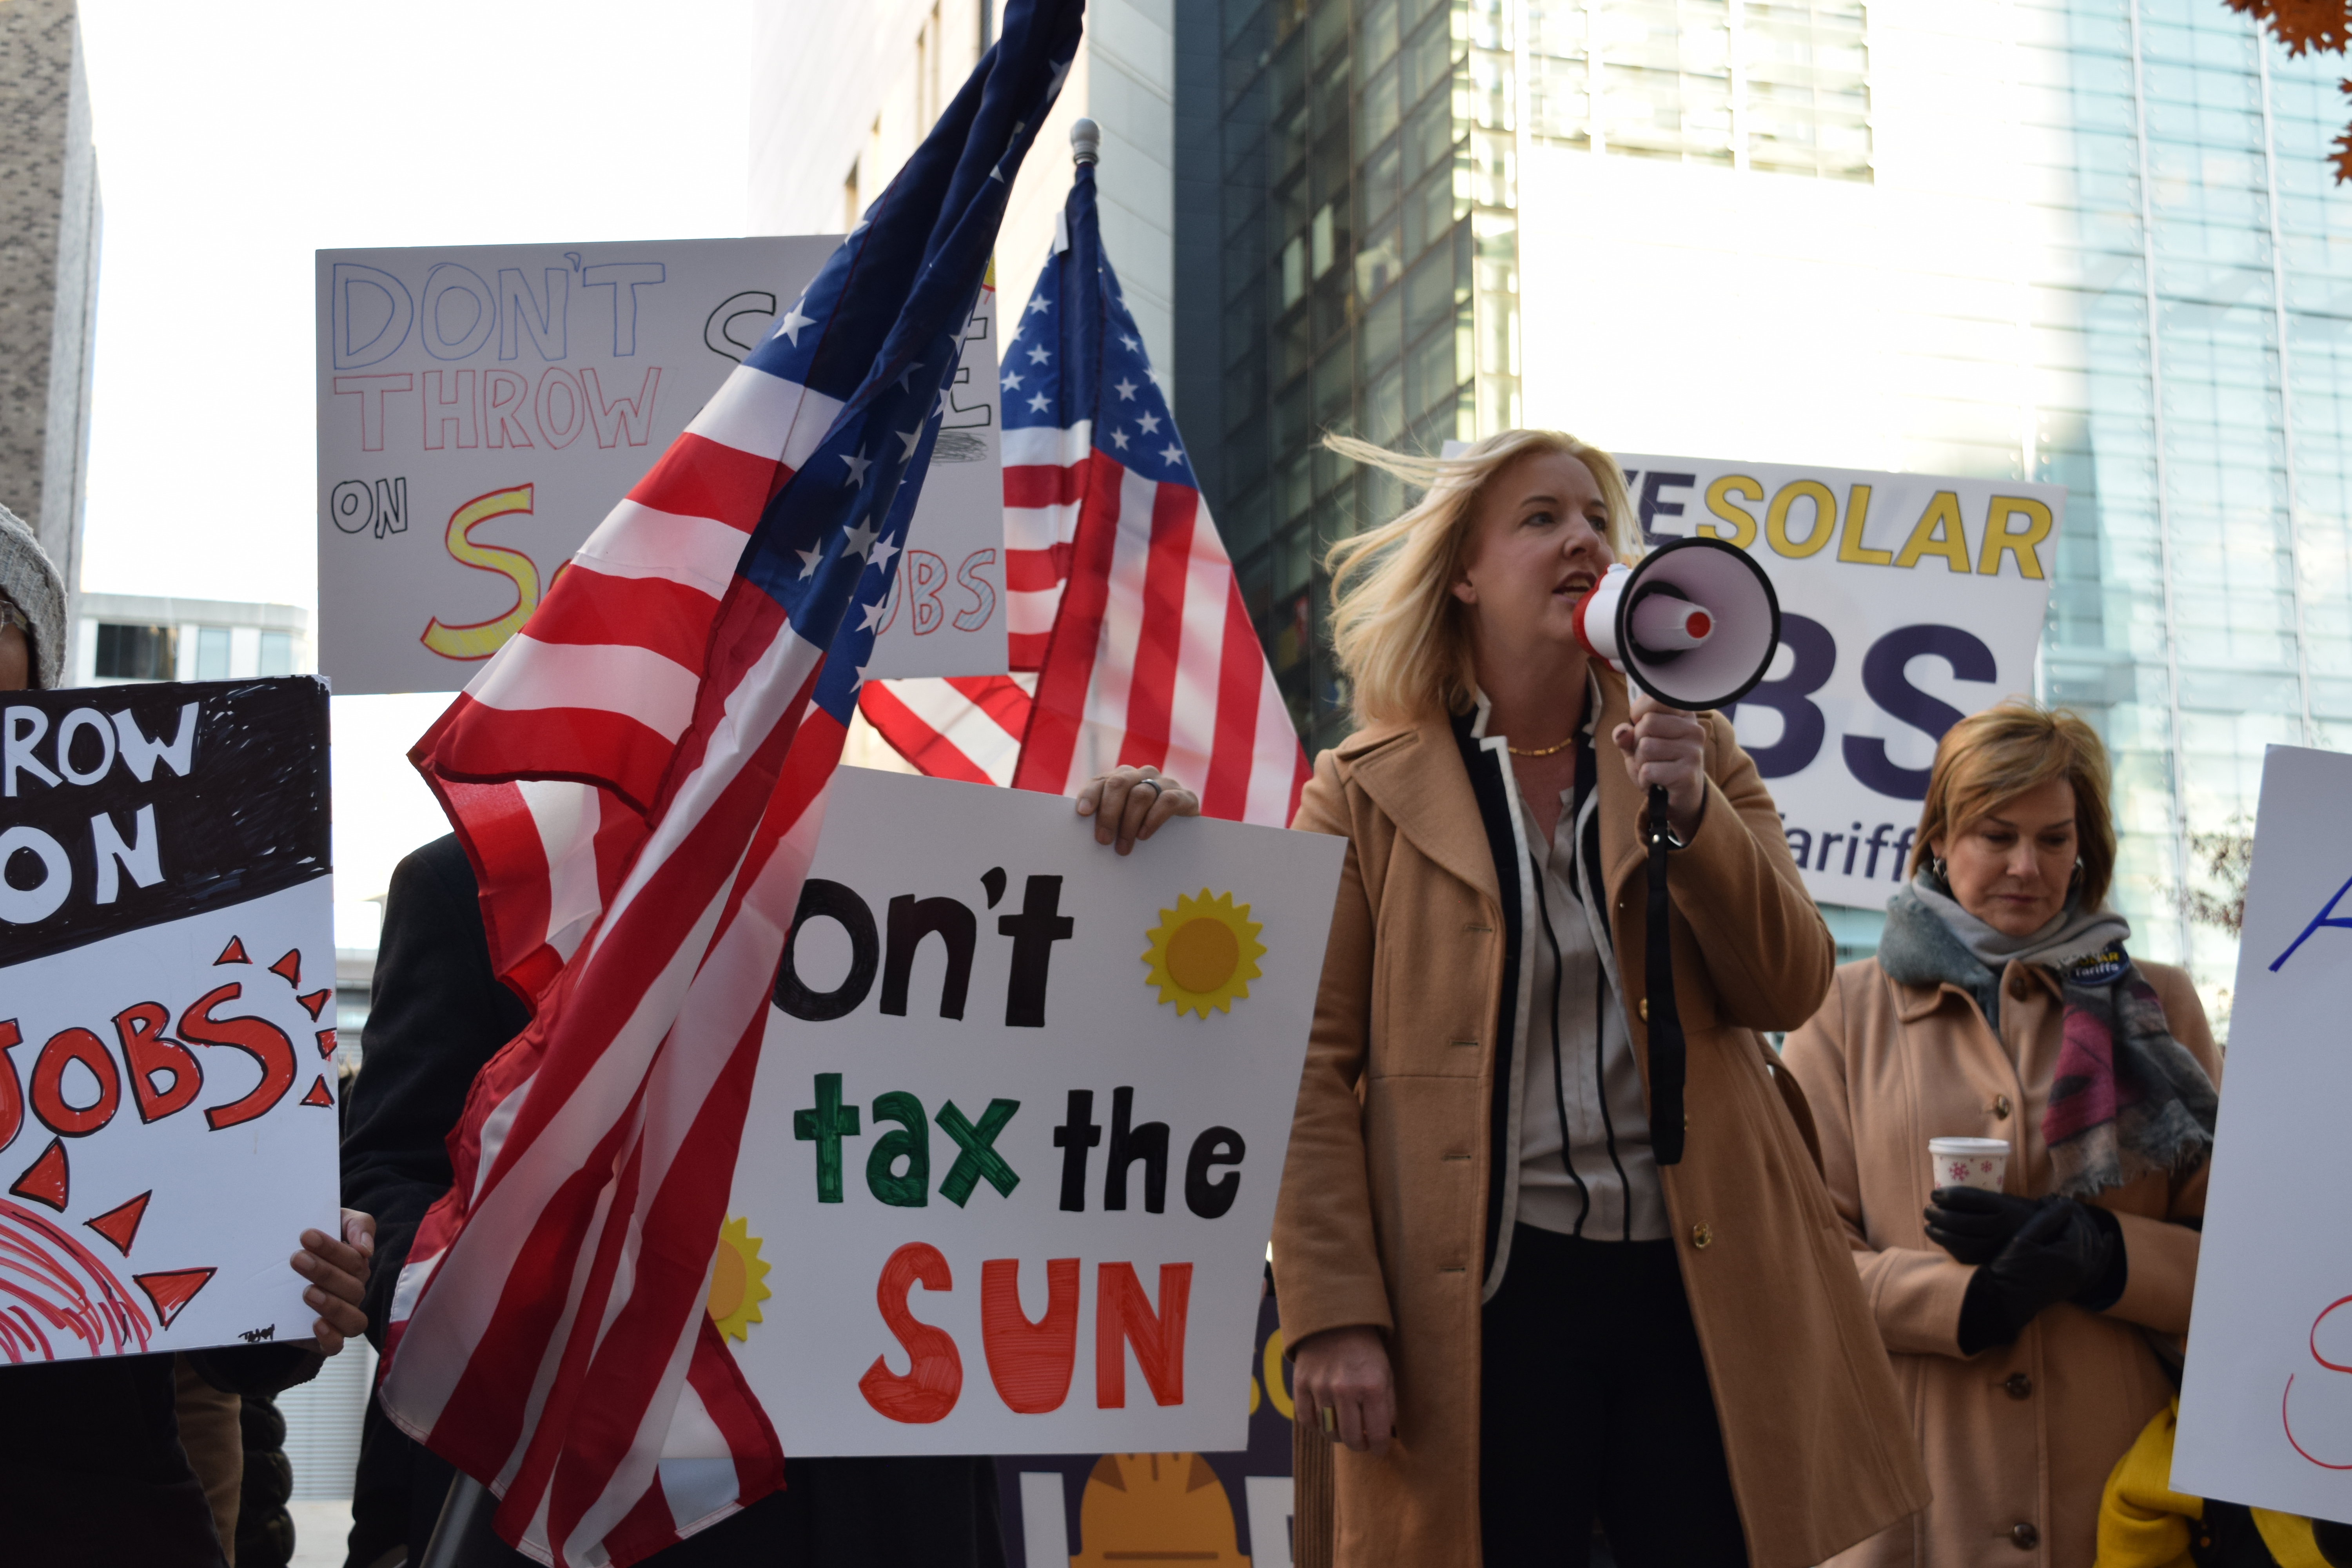 Abby Hopper speaking at the rally to stop solar tariffs